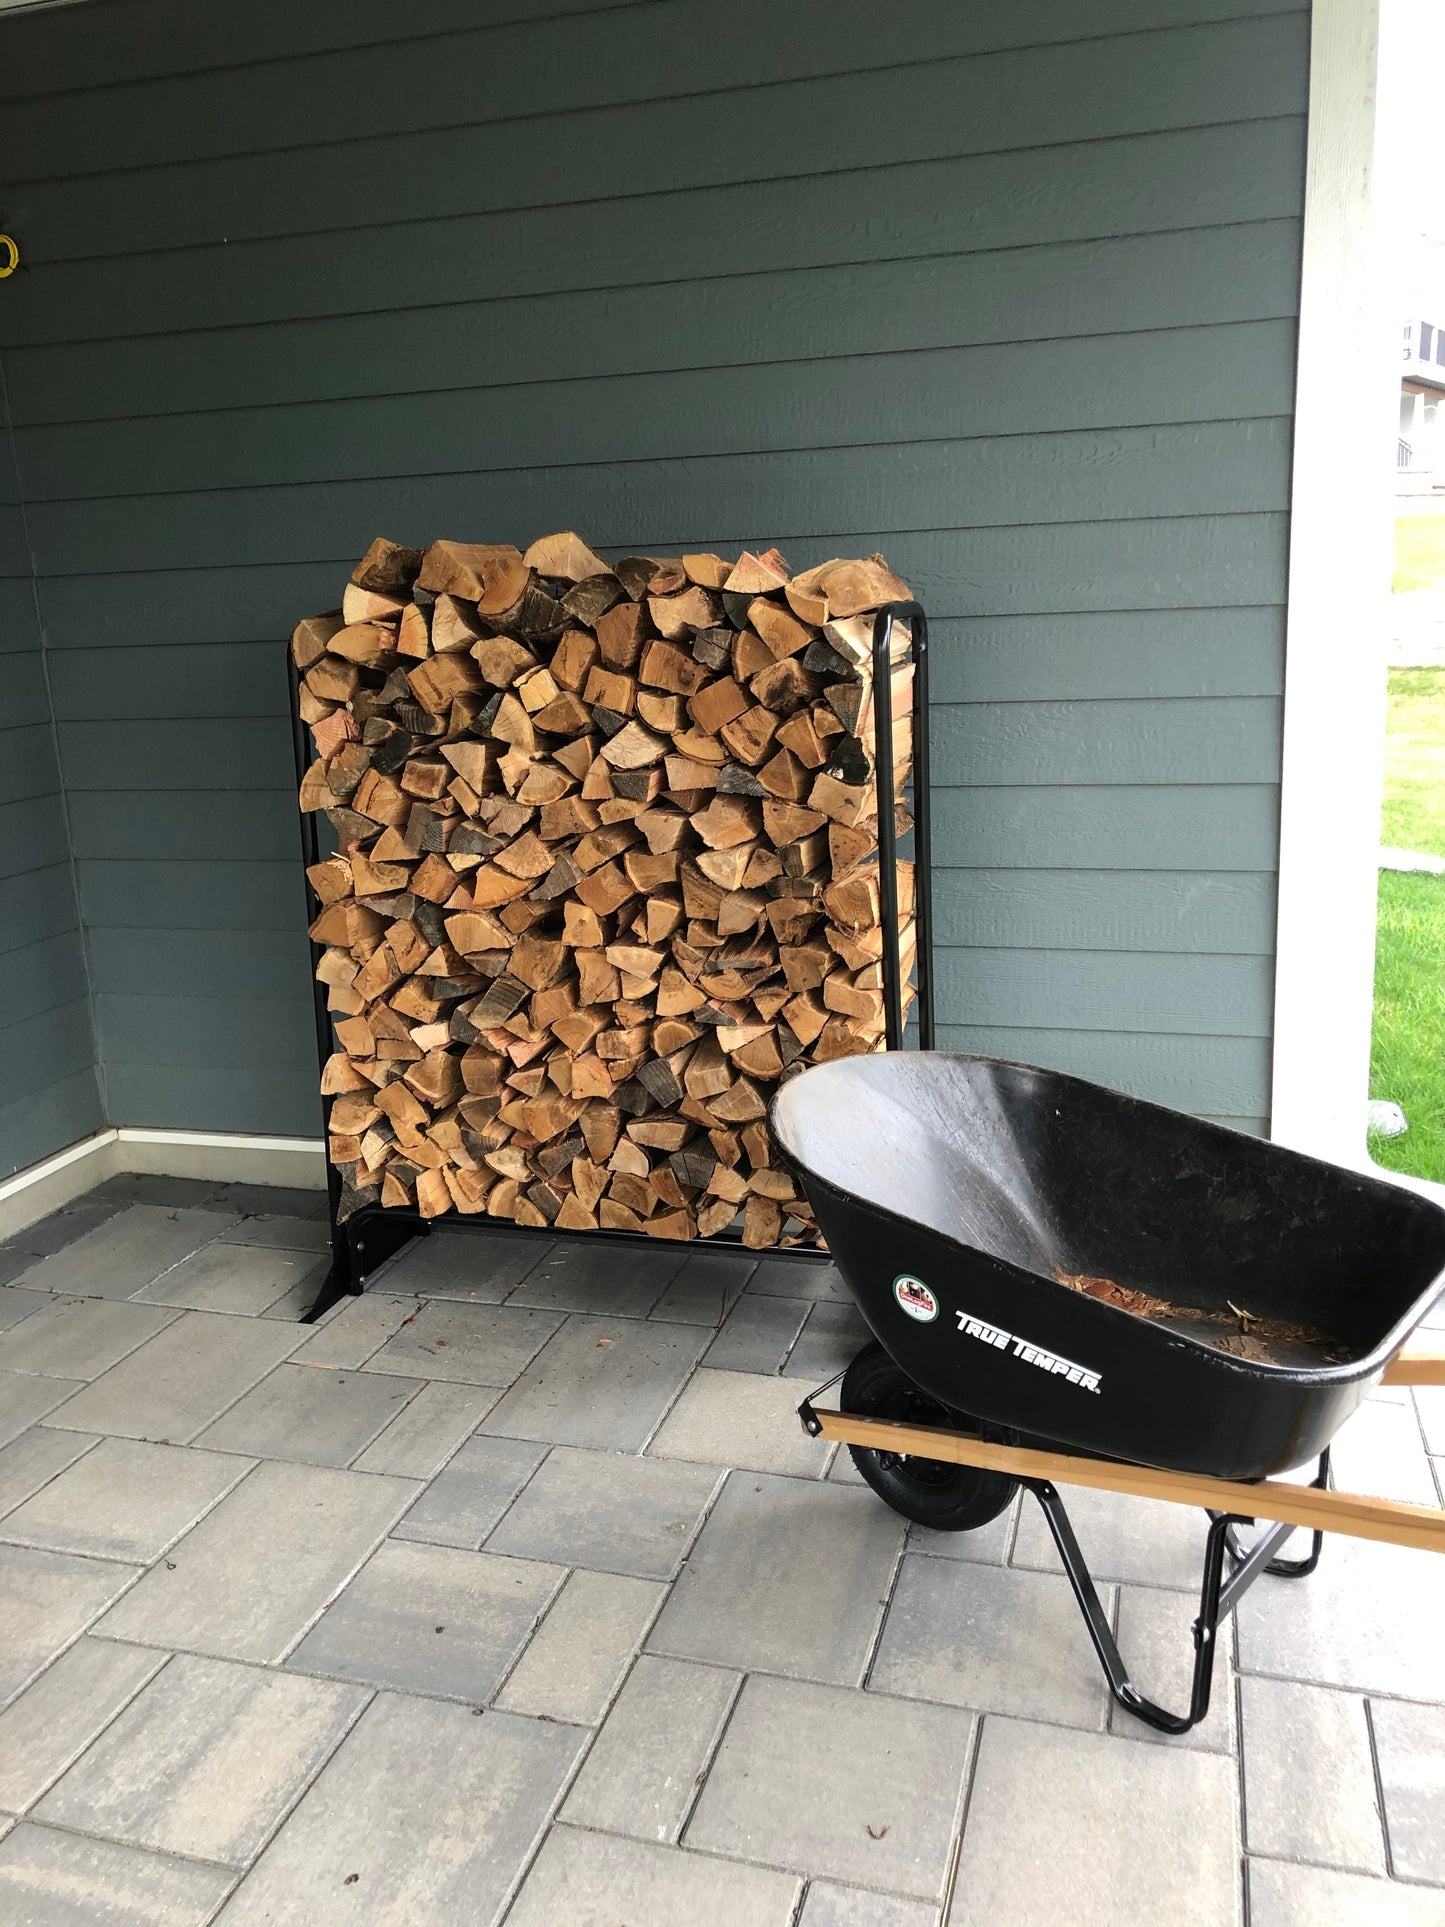 Bulk Firewood, Local Pickup and Delivery With An Extra Charge